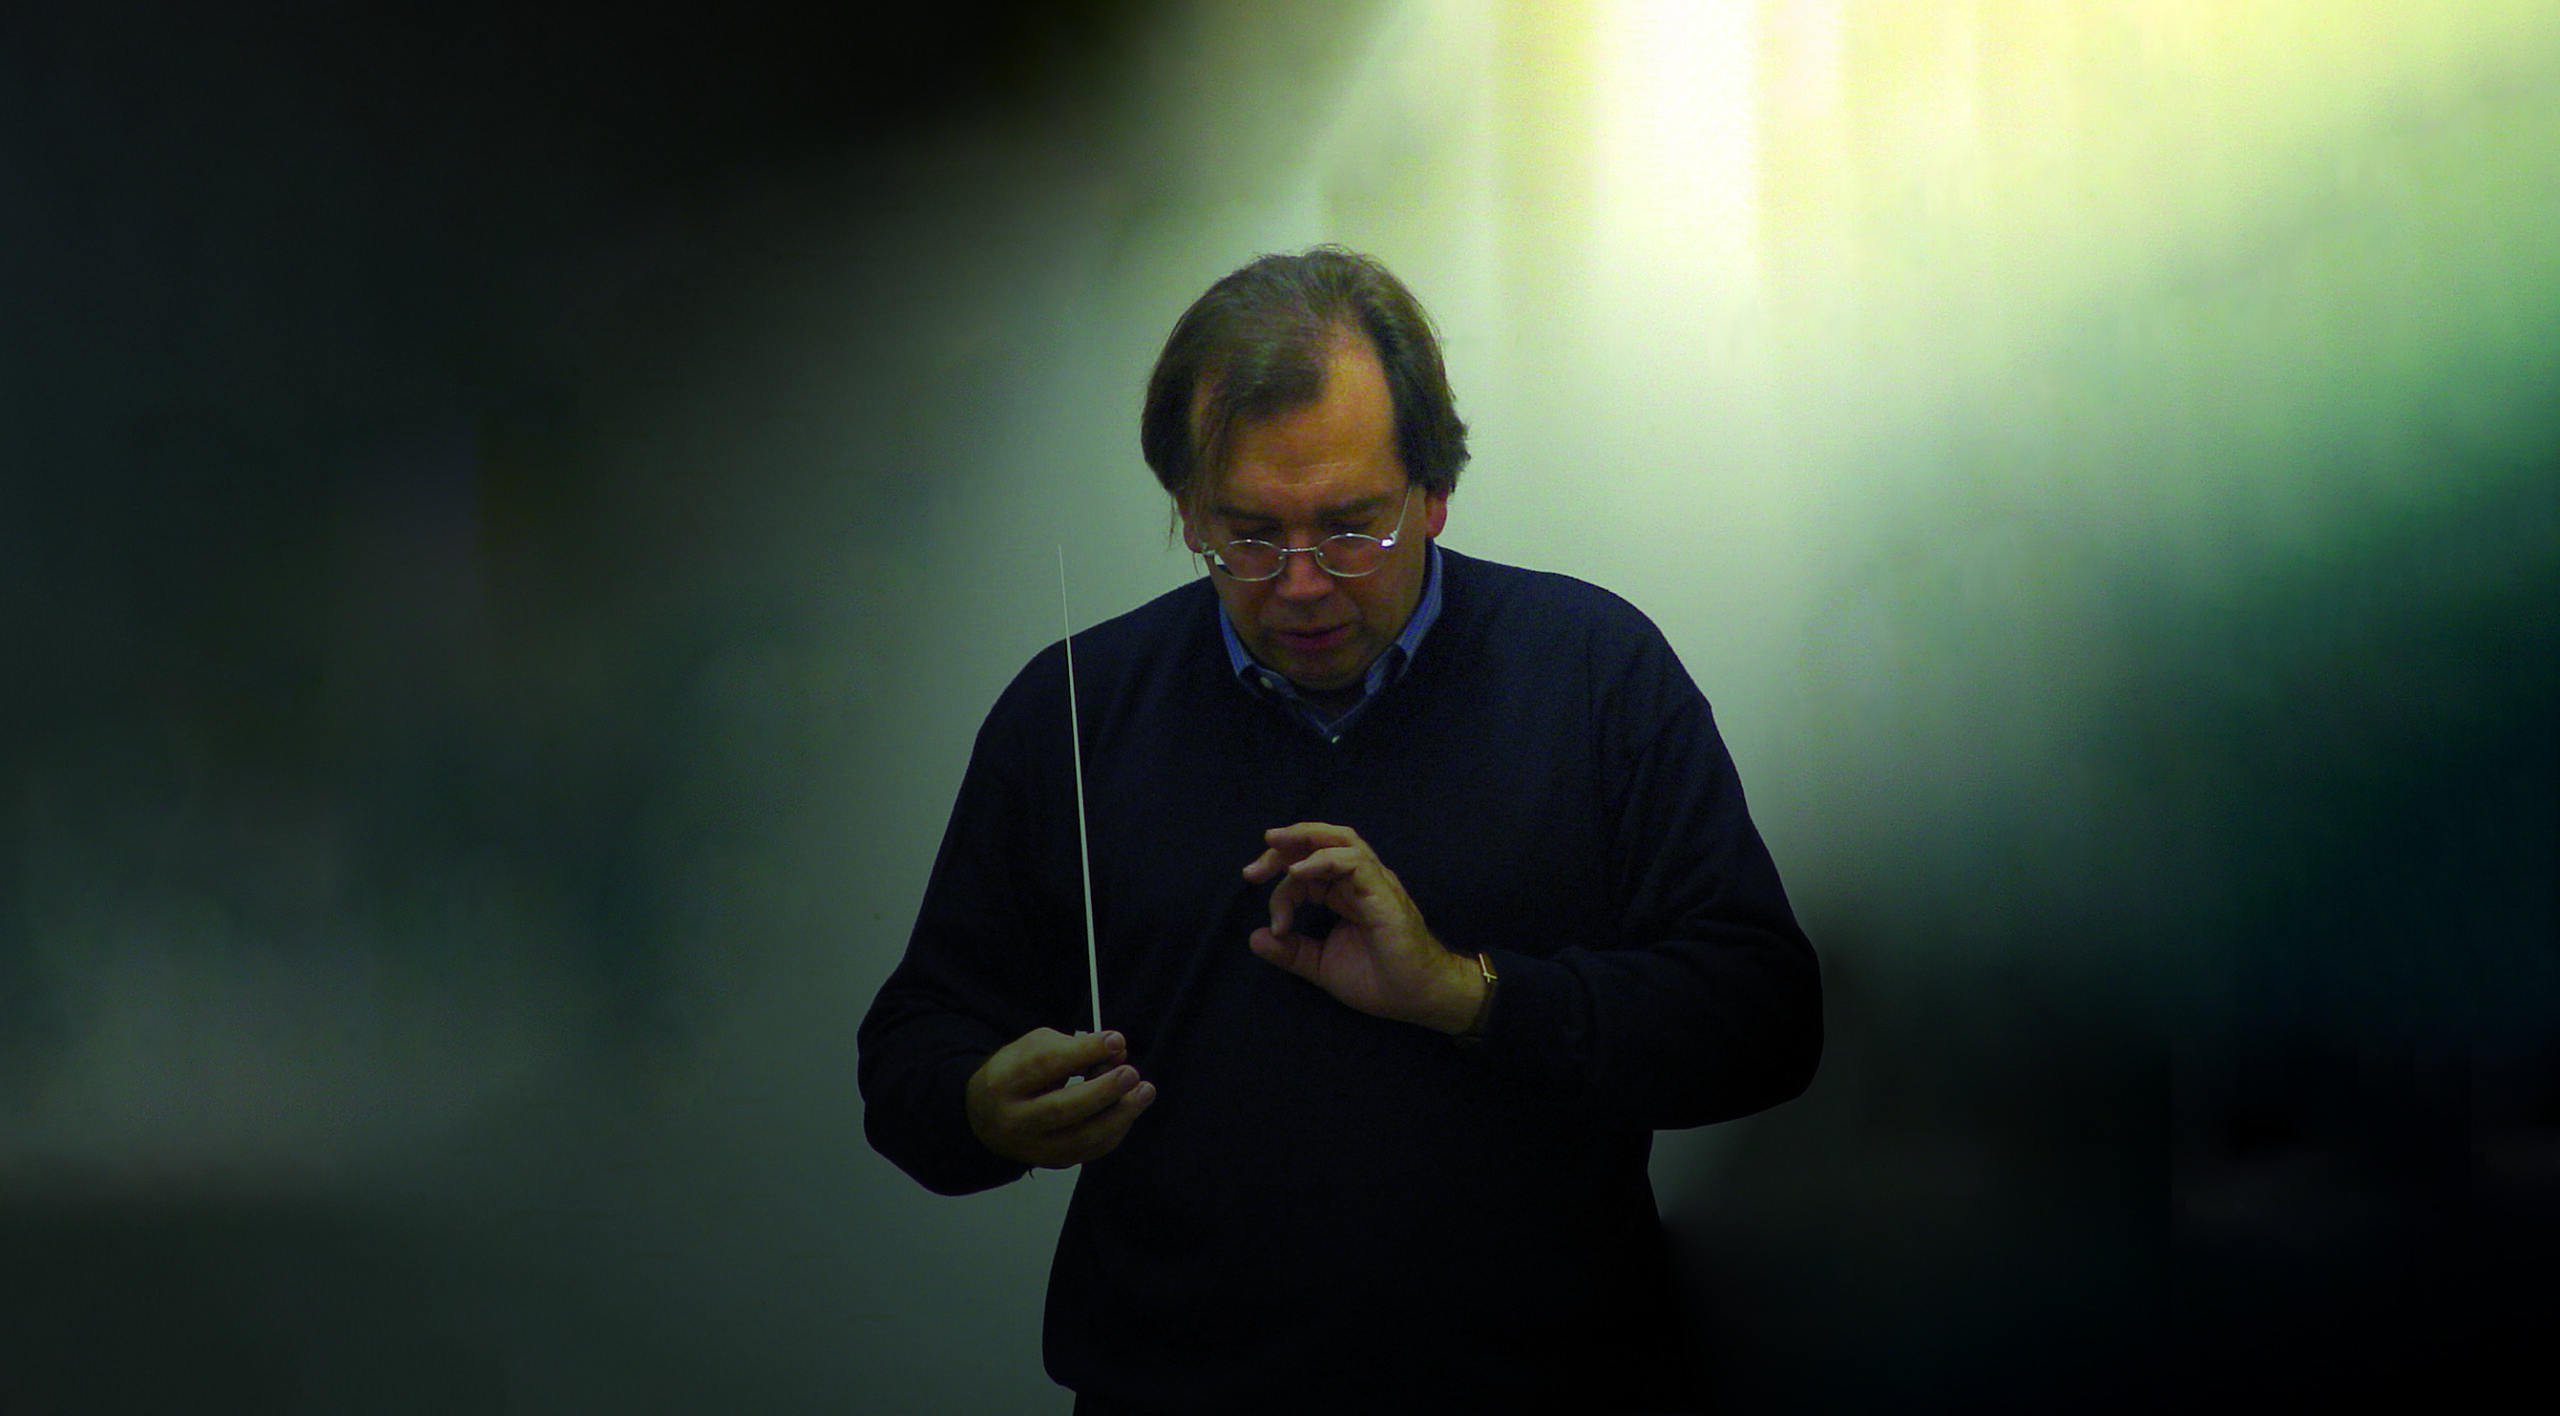 Portrait of the conductor Christian Kabitz. He is standing in a light-flooded room, holding a conductor's baton and is completely absorbed in his conducting.